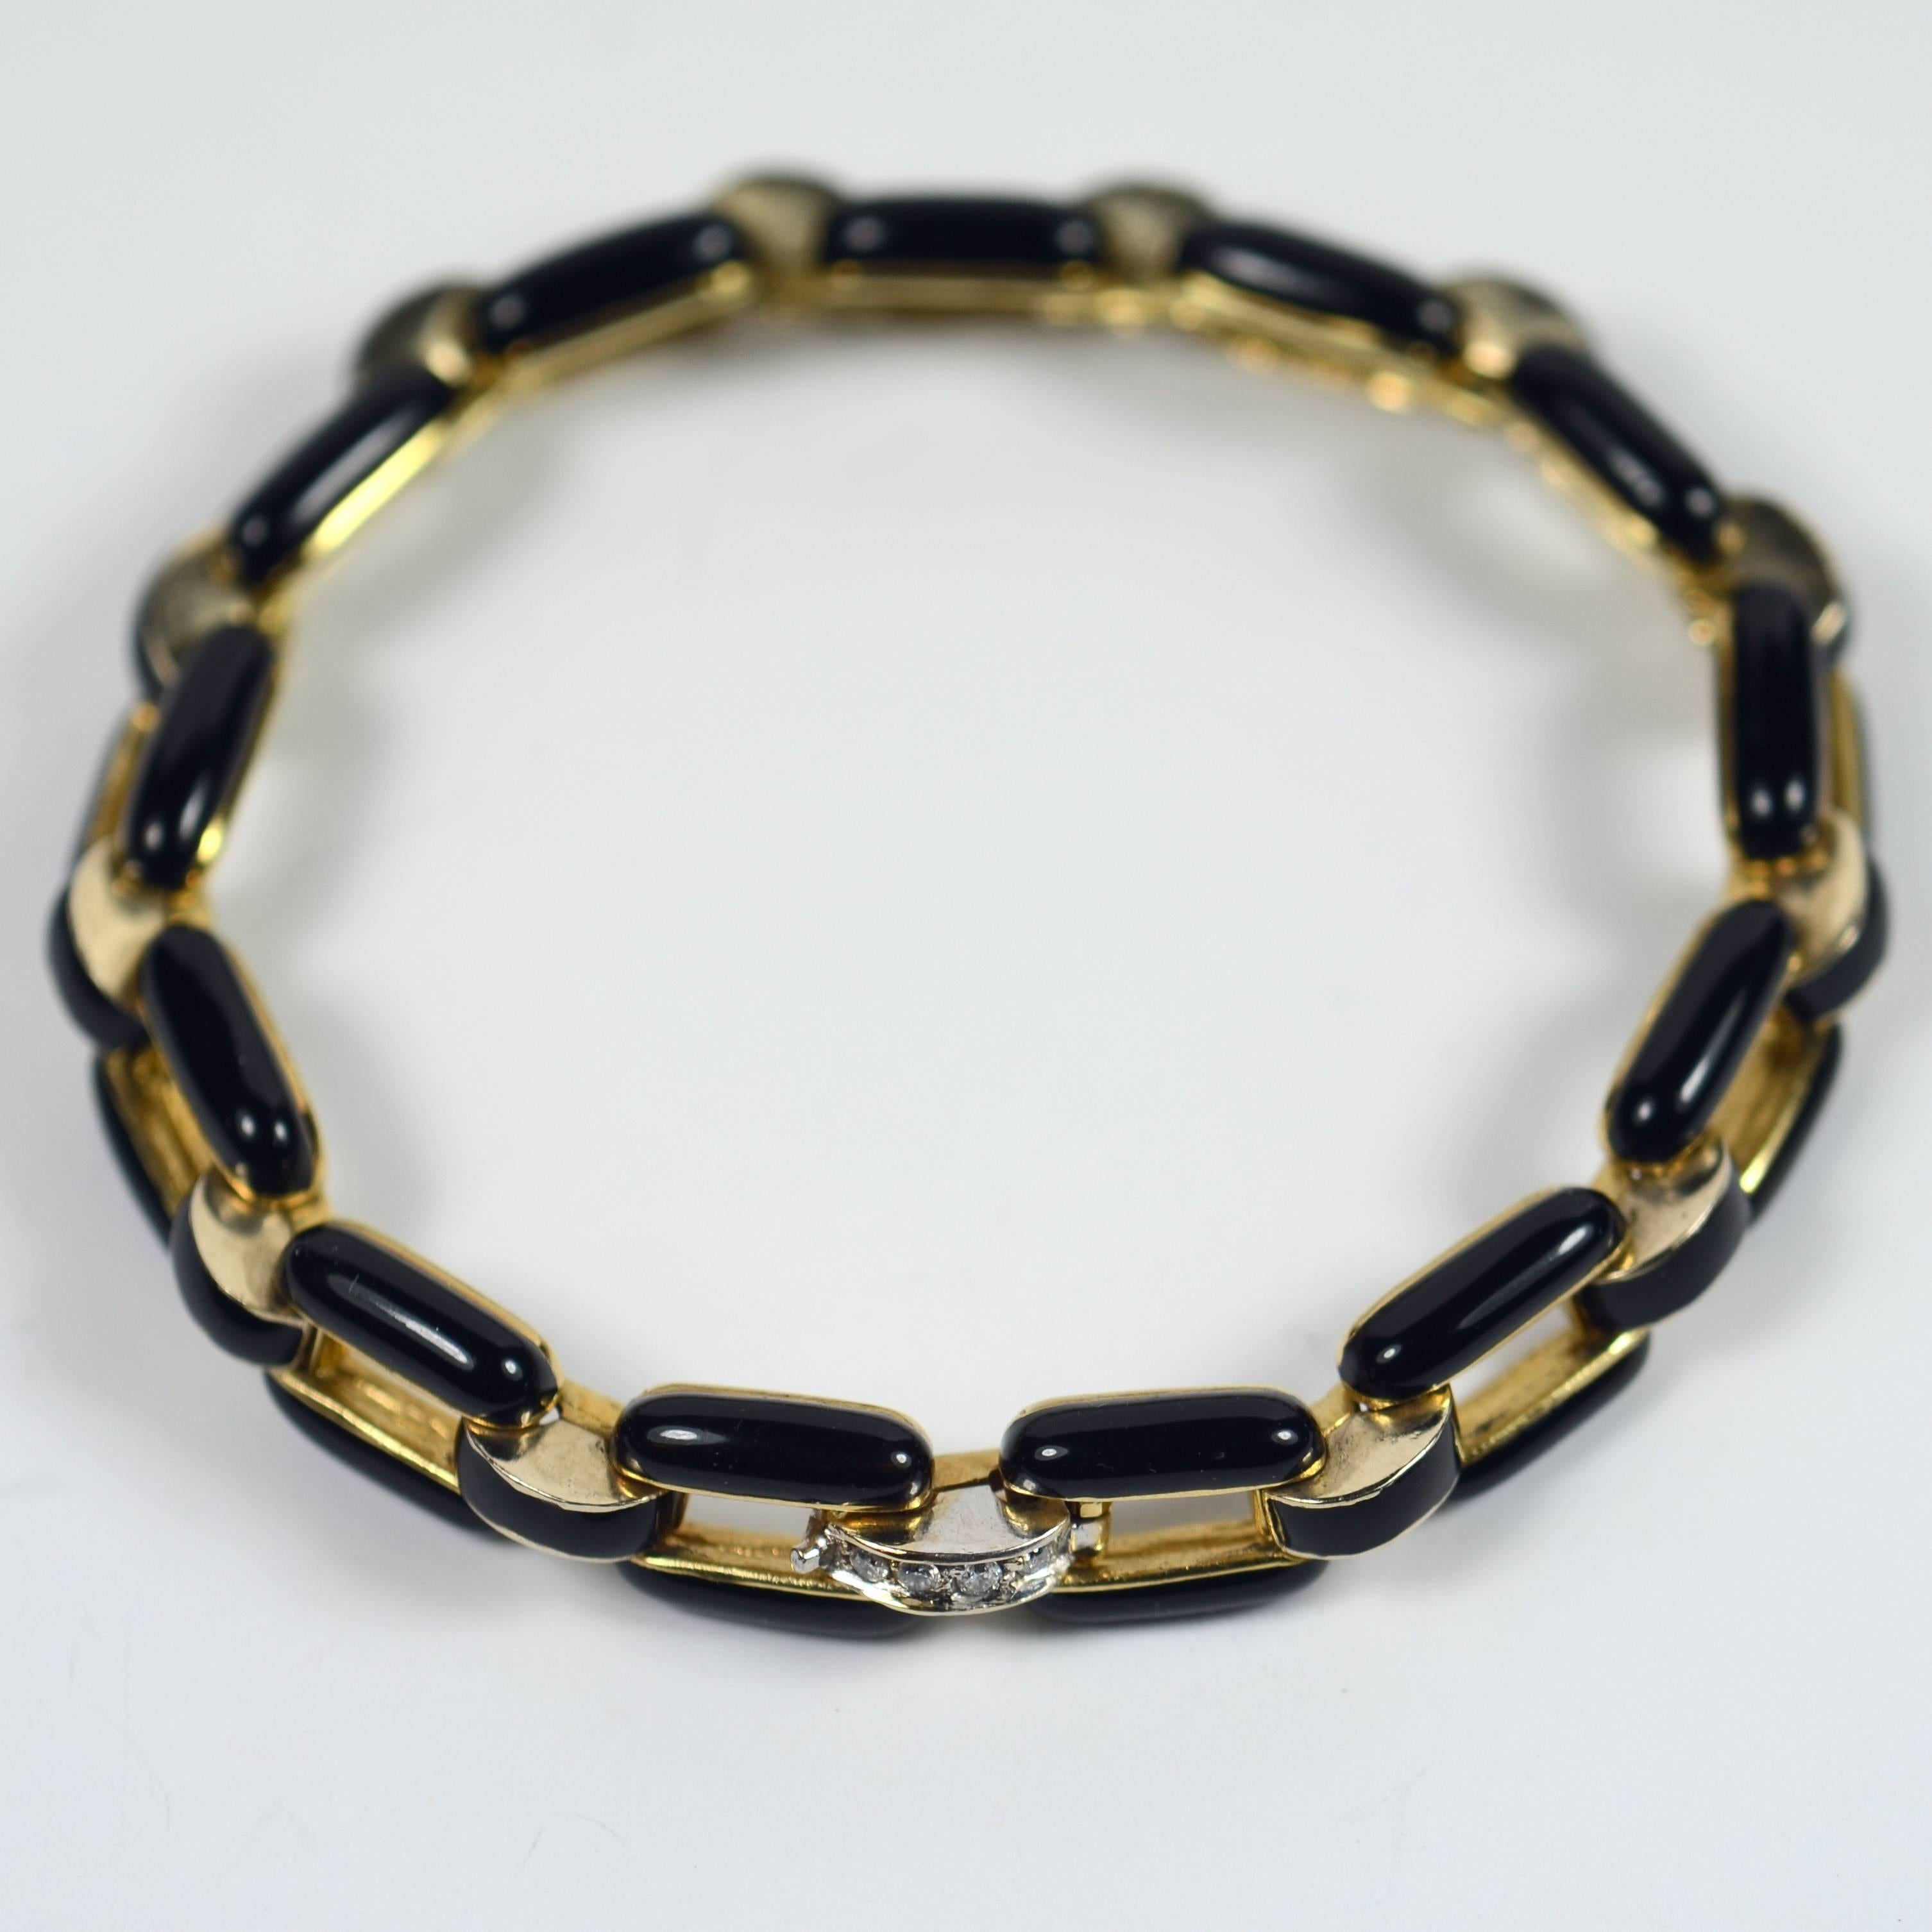 A very chic bracelet in 18 carat gold and black enamel with a diamond clasp detail.  This bracelet shows the monochromatic aesthetic for which the Art Deco period was famed.  

This elegant bracelet is effortlessly smart and extremely wearable.  It